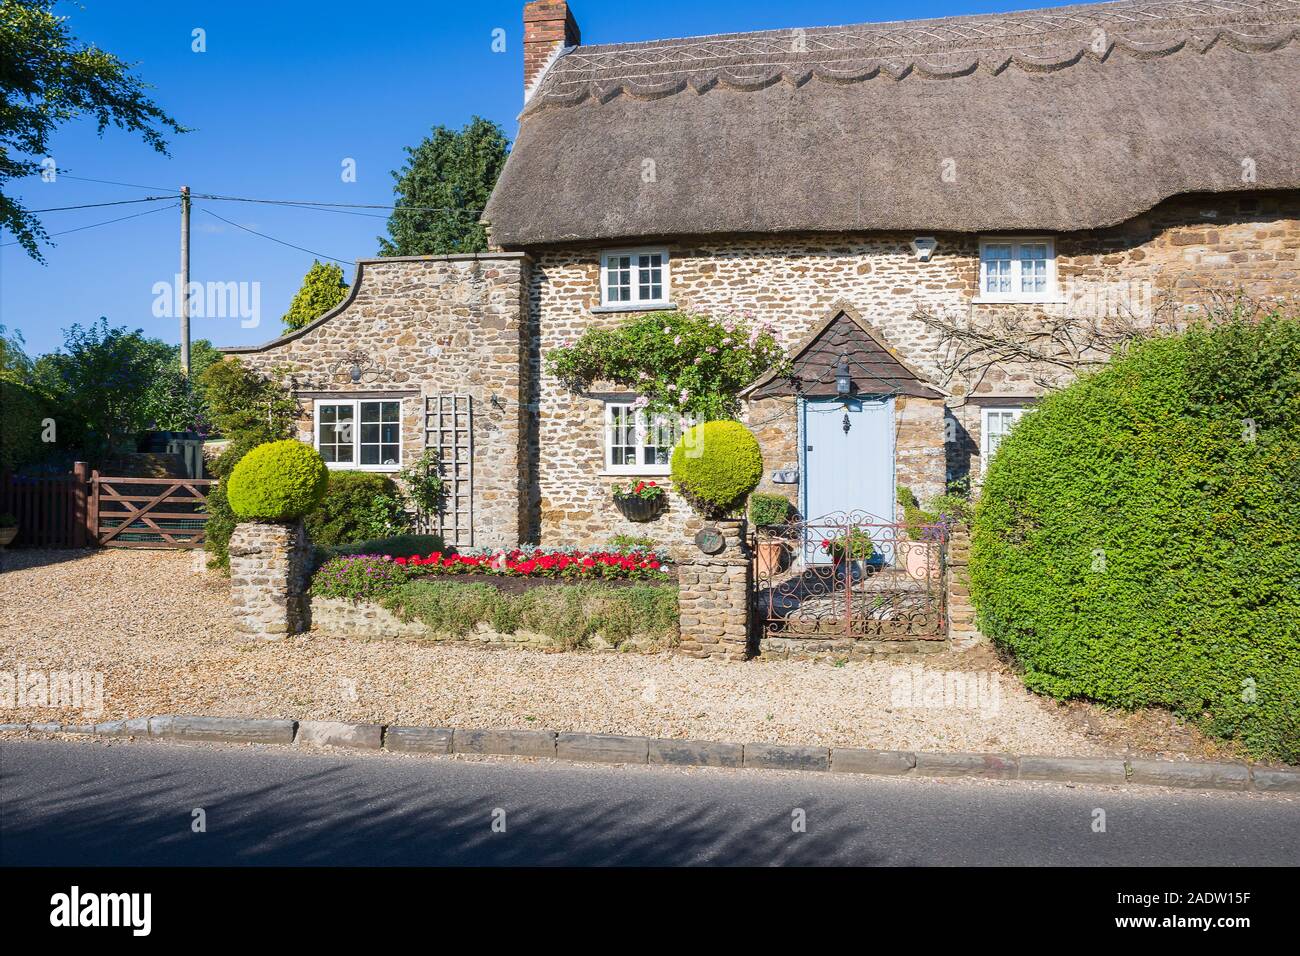 An old period roadside thatched detached cottagein Sandy Lanel Wiltshire England UK Stock Photo